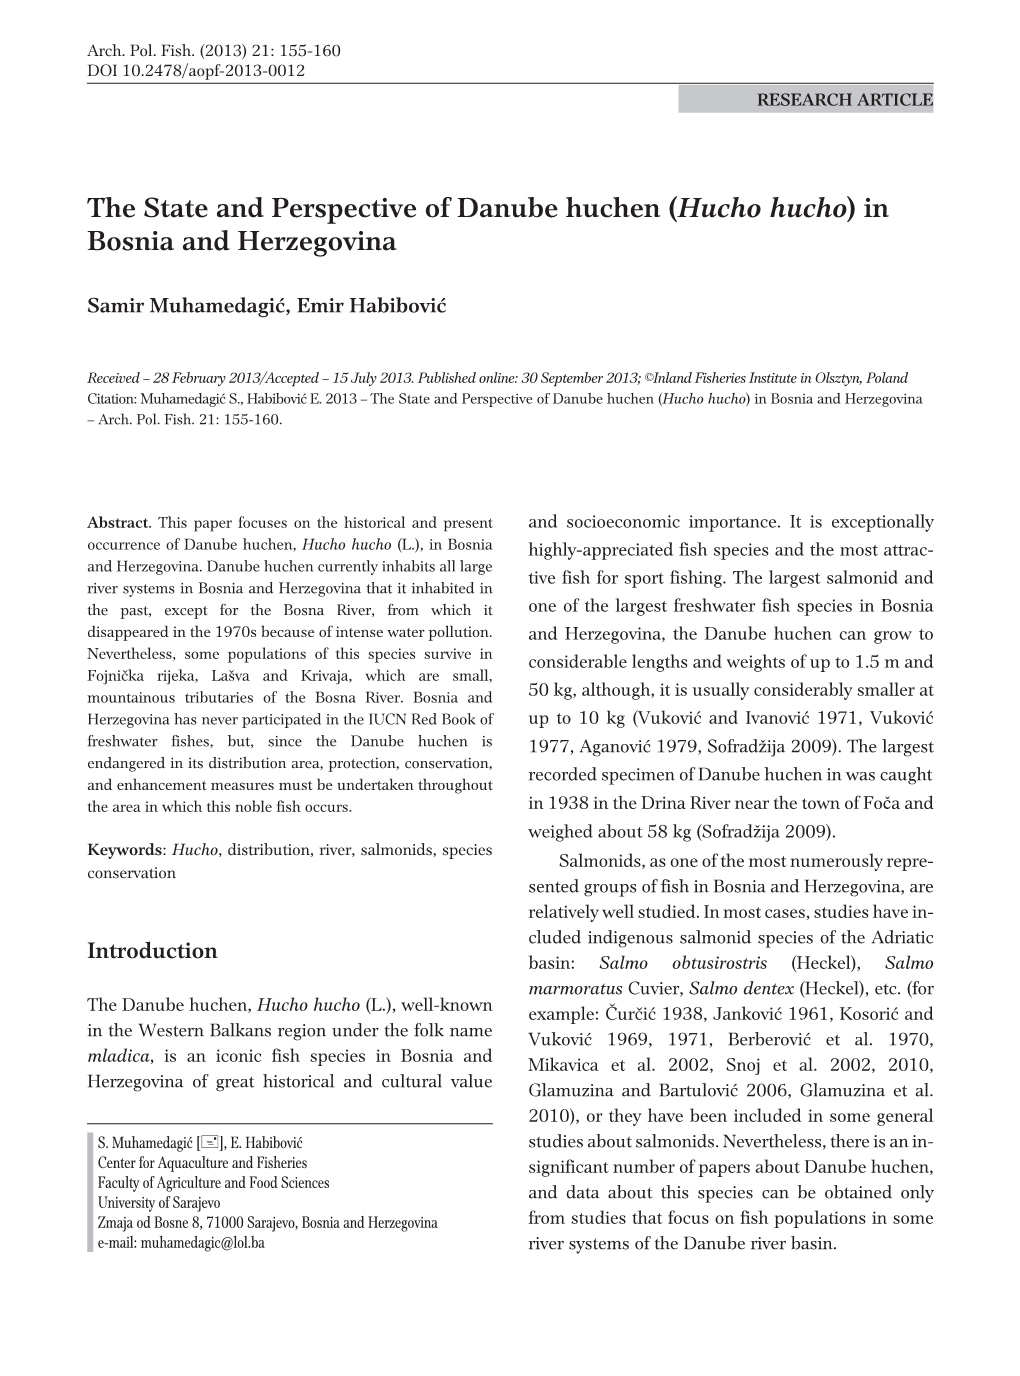 The State and Perspective of Danube Huchen (Hucho Hucho) in Bosnia and Herzegovina – Arch